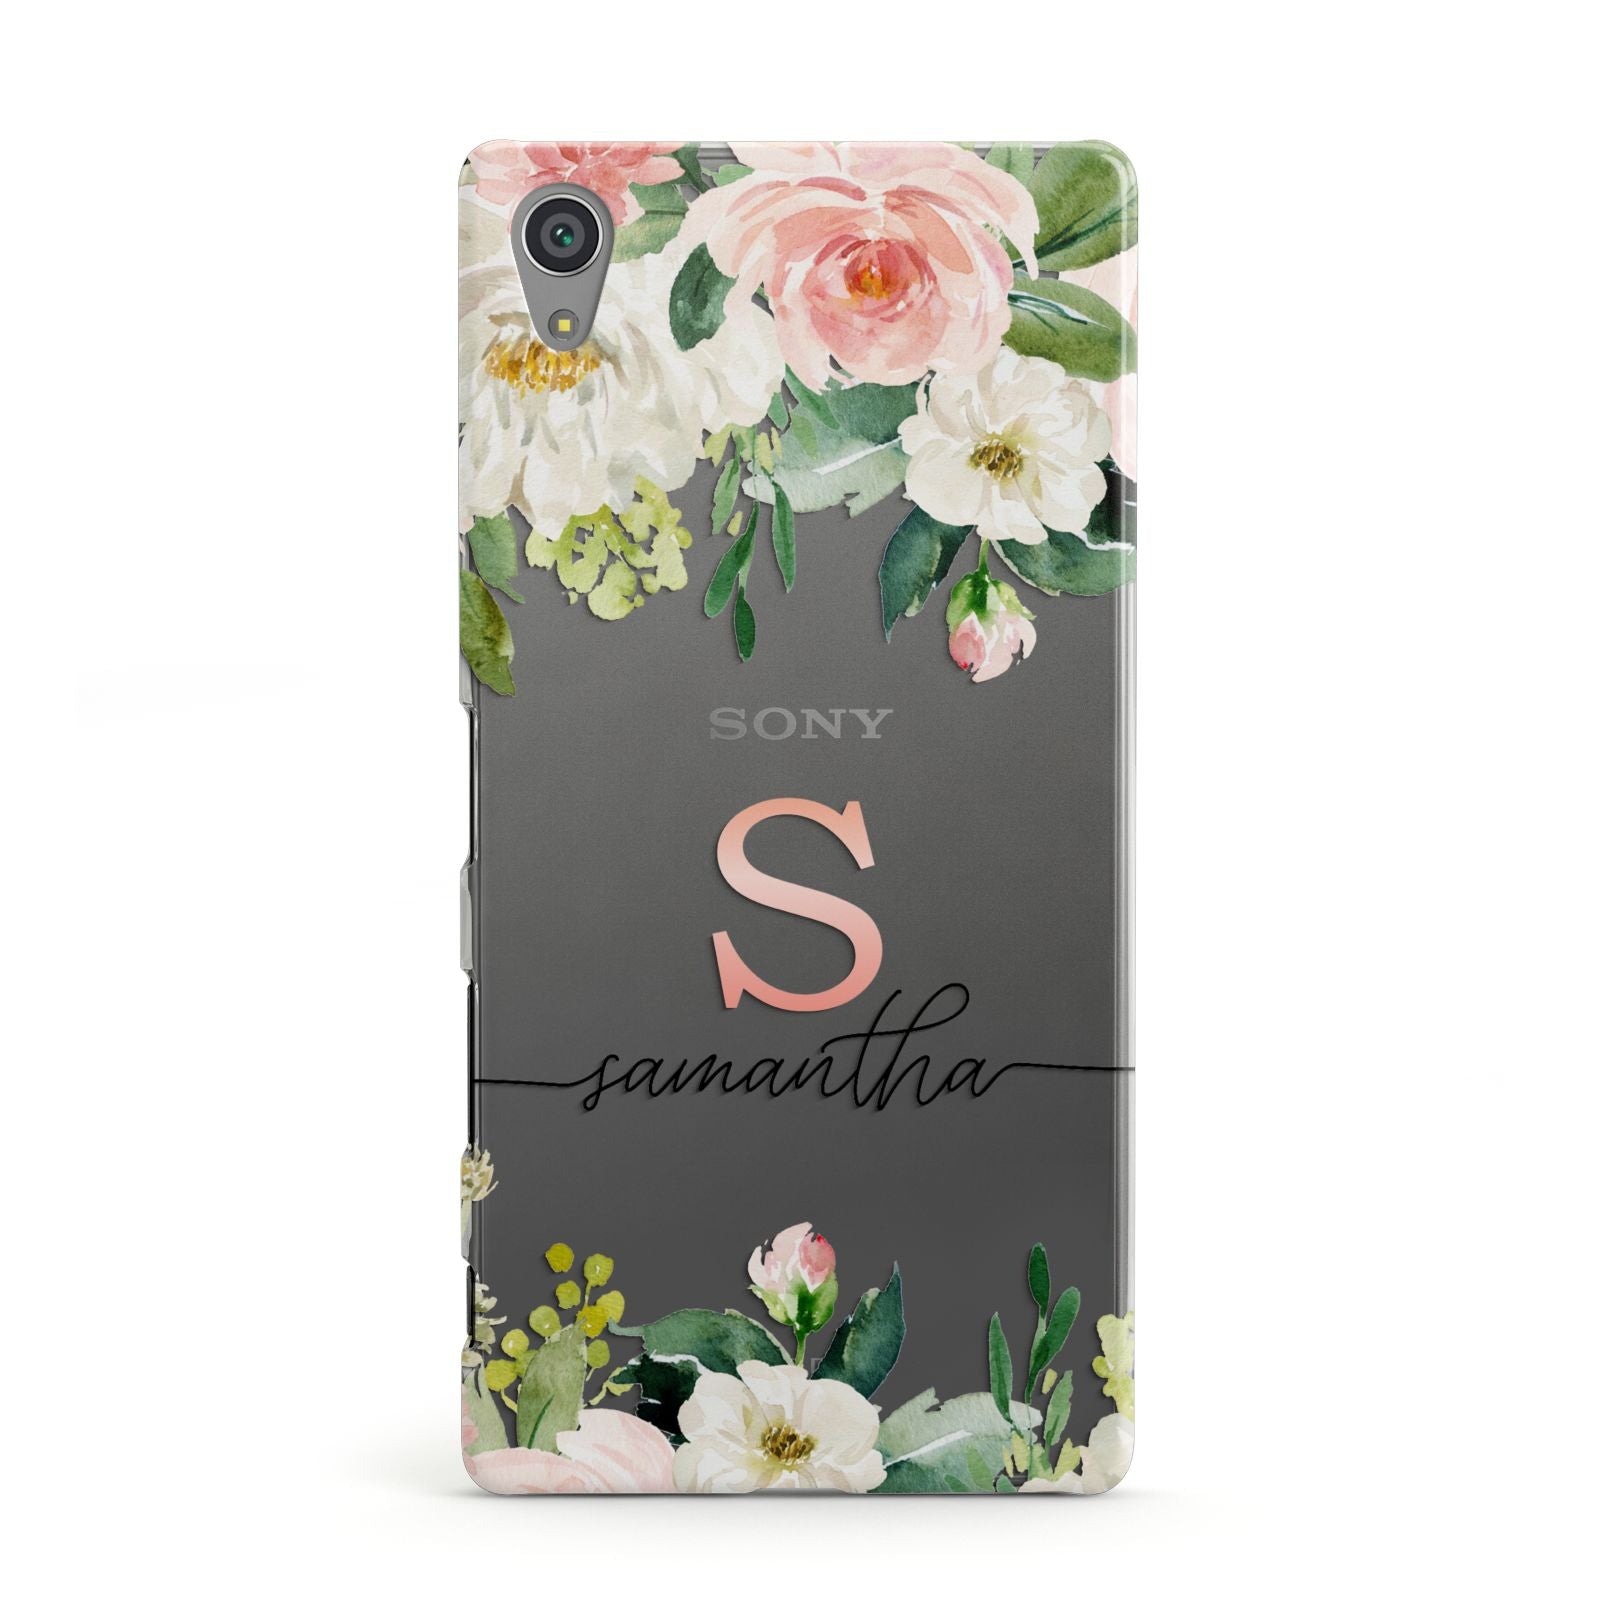 Monogrammed Floral Roses Sony Xperia Case